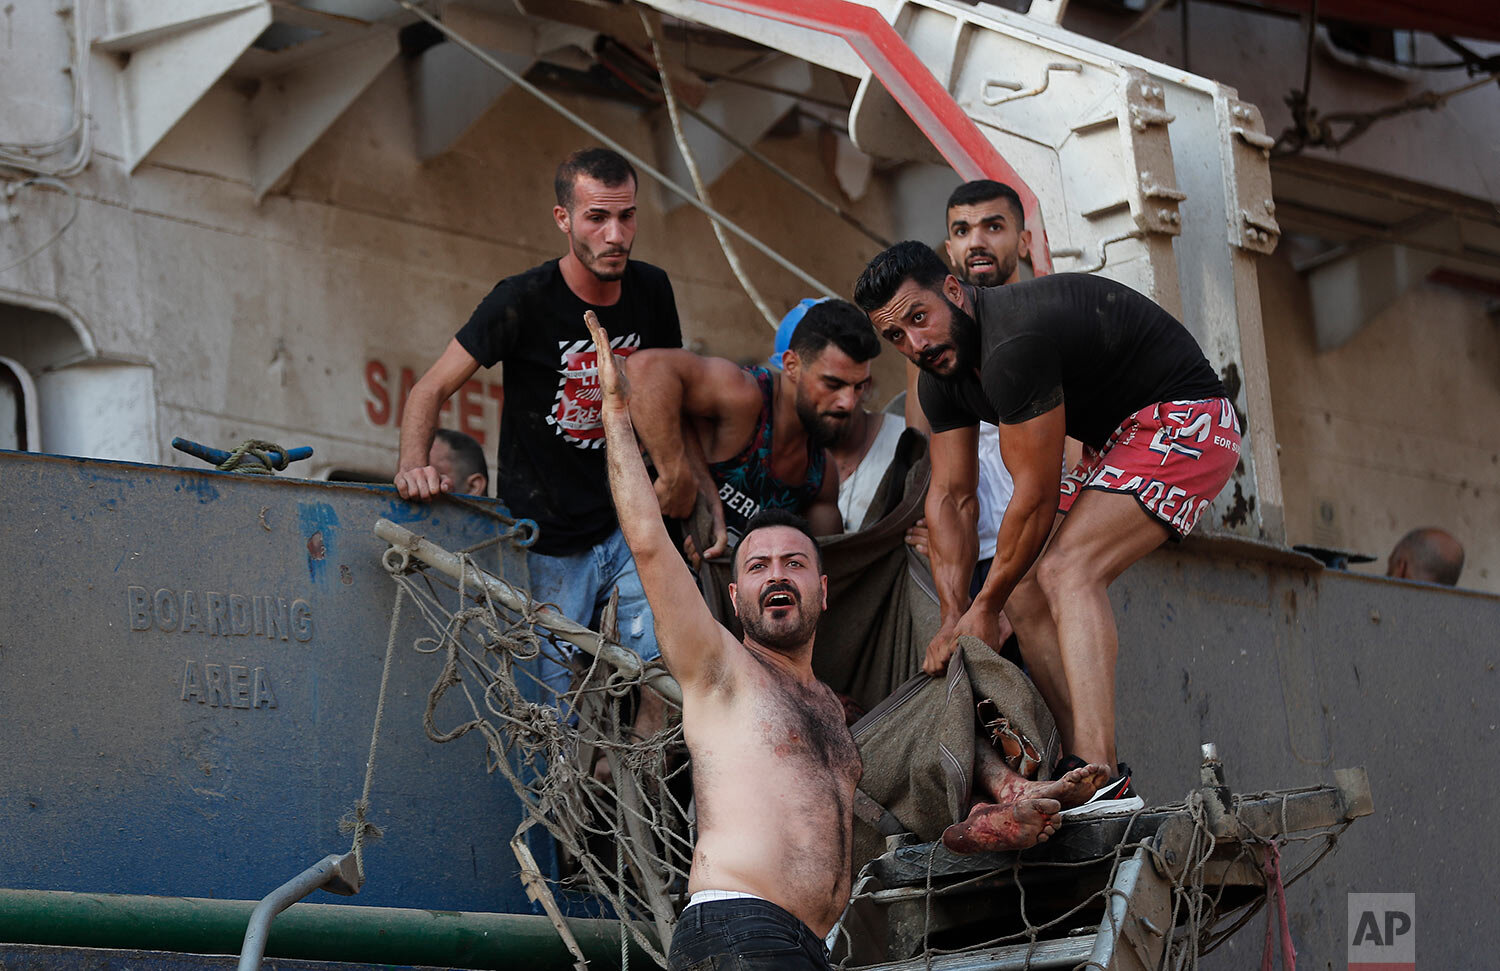  Civilians help to evacuate an injured sailor from a ship which was docked near the explosion scene that hit the seaport of Beirut, Lebanon, Tuesday, Aug. 4, 2020. (AP Photo/Hussein Malla) 